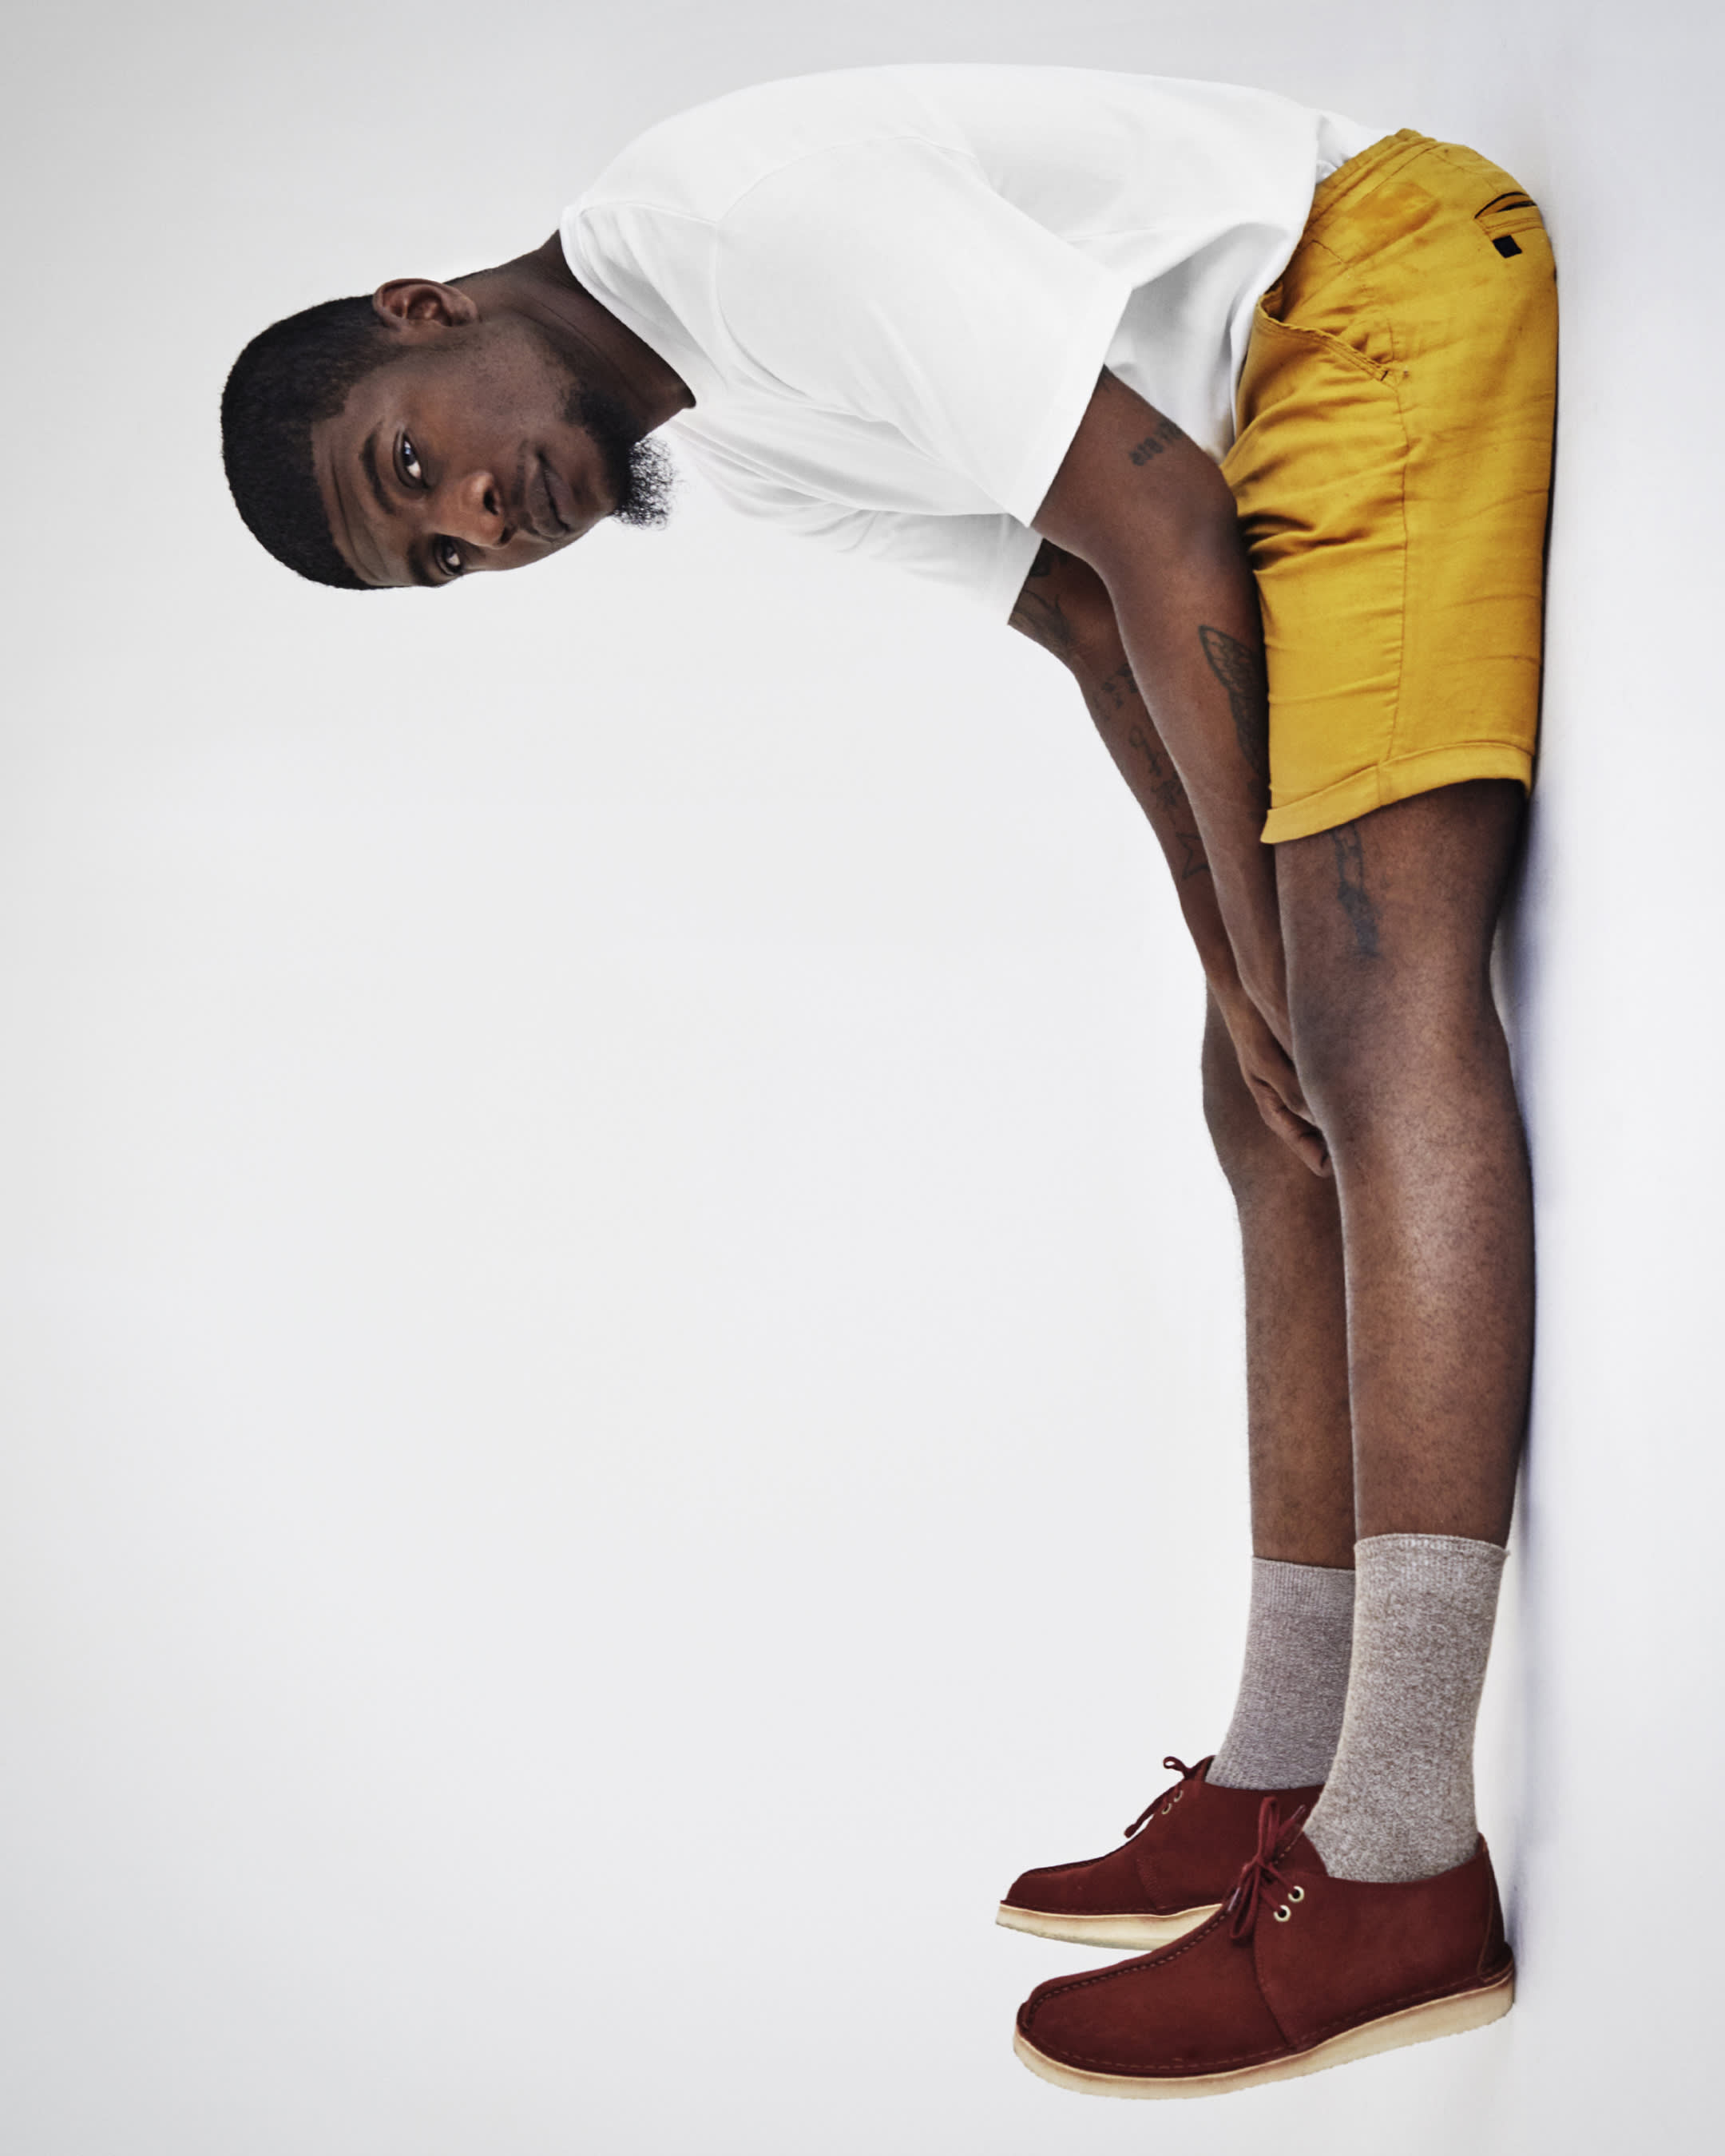 Four Rising Stars on COLORS Get Decked out in Clarks Originals | Complex